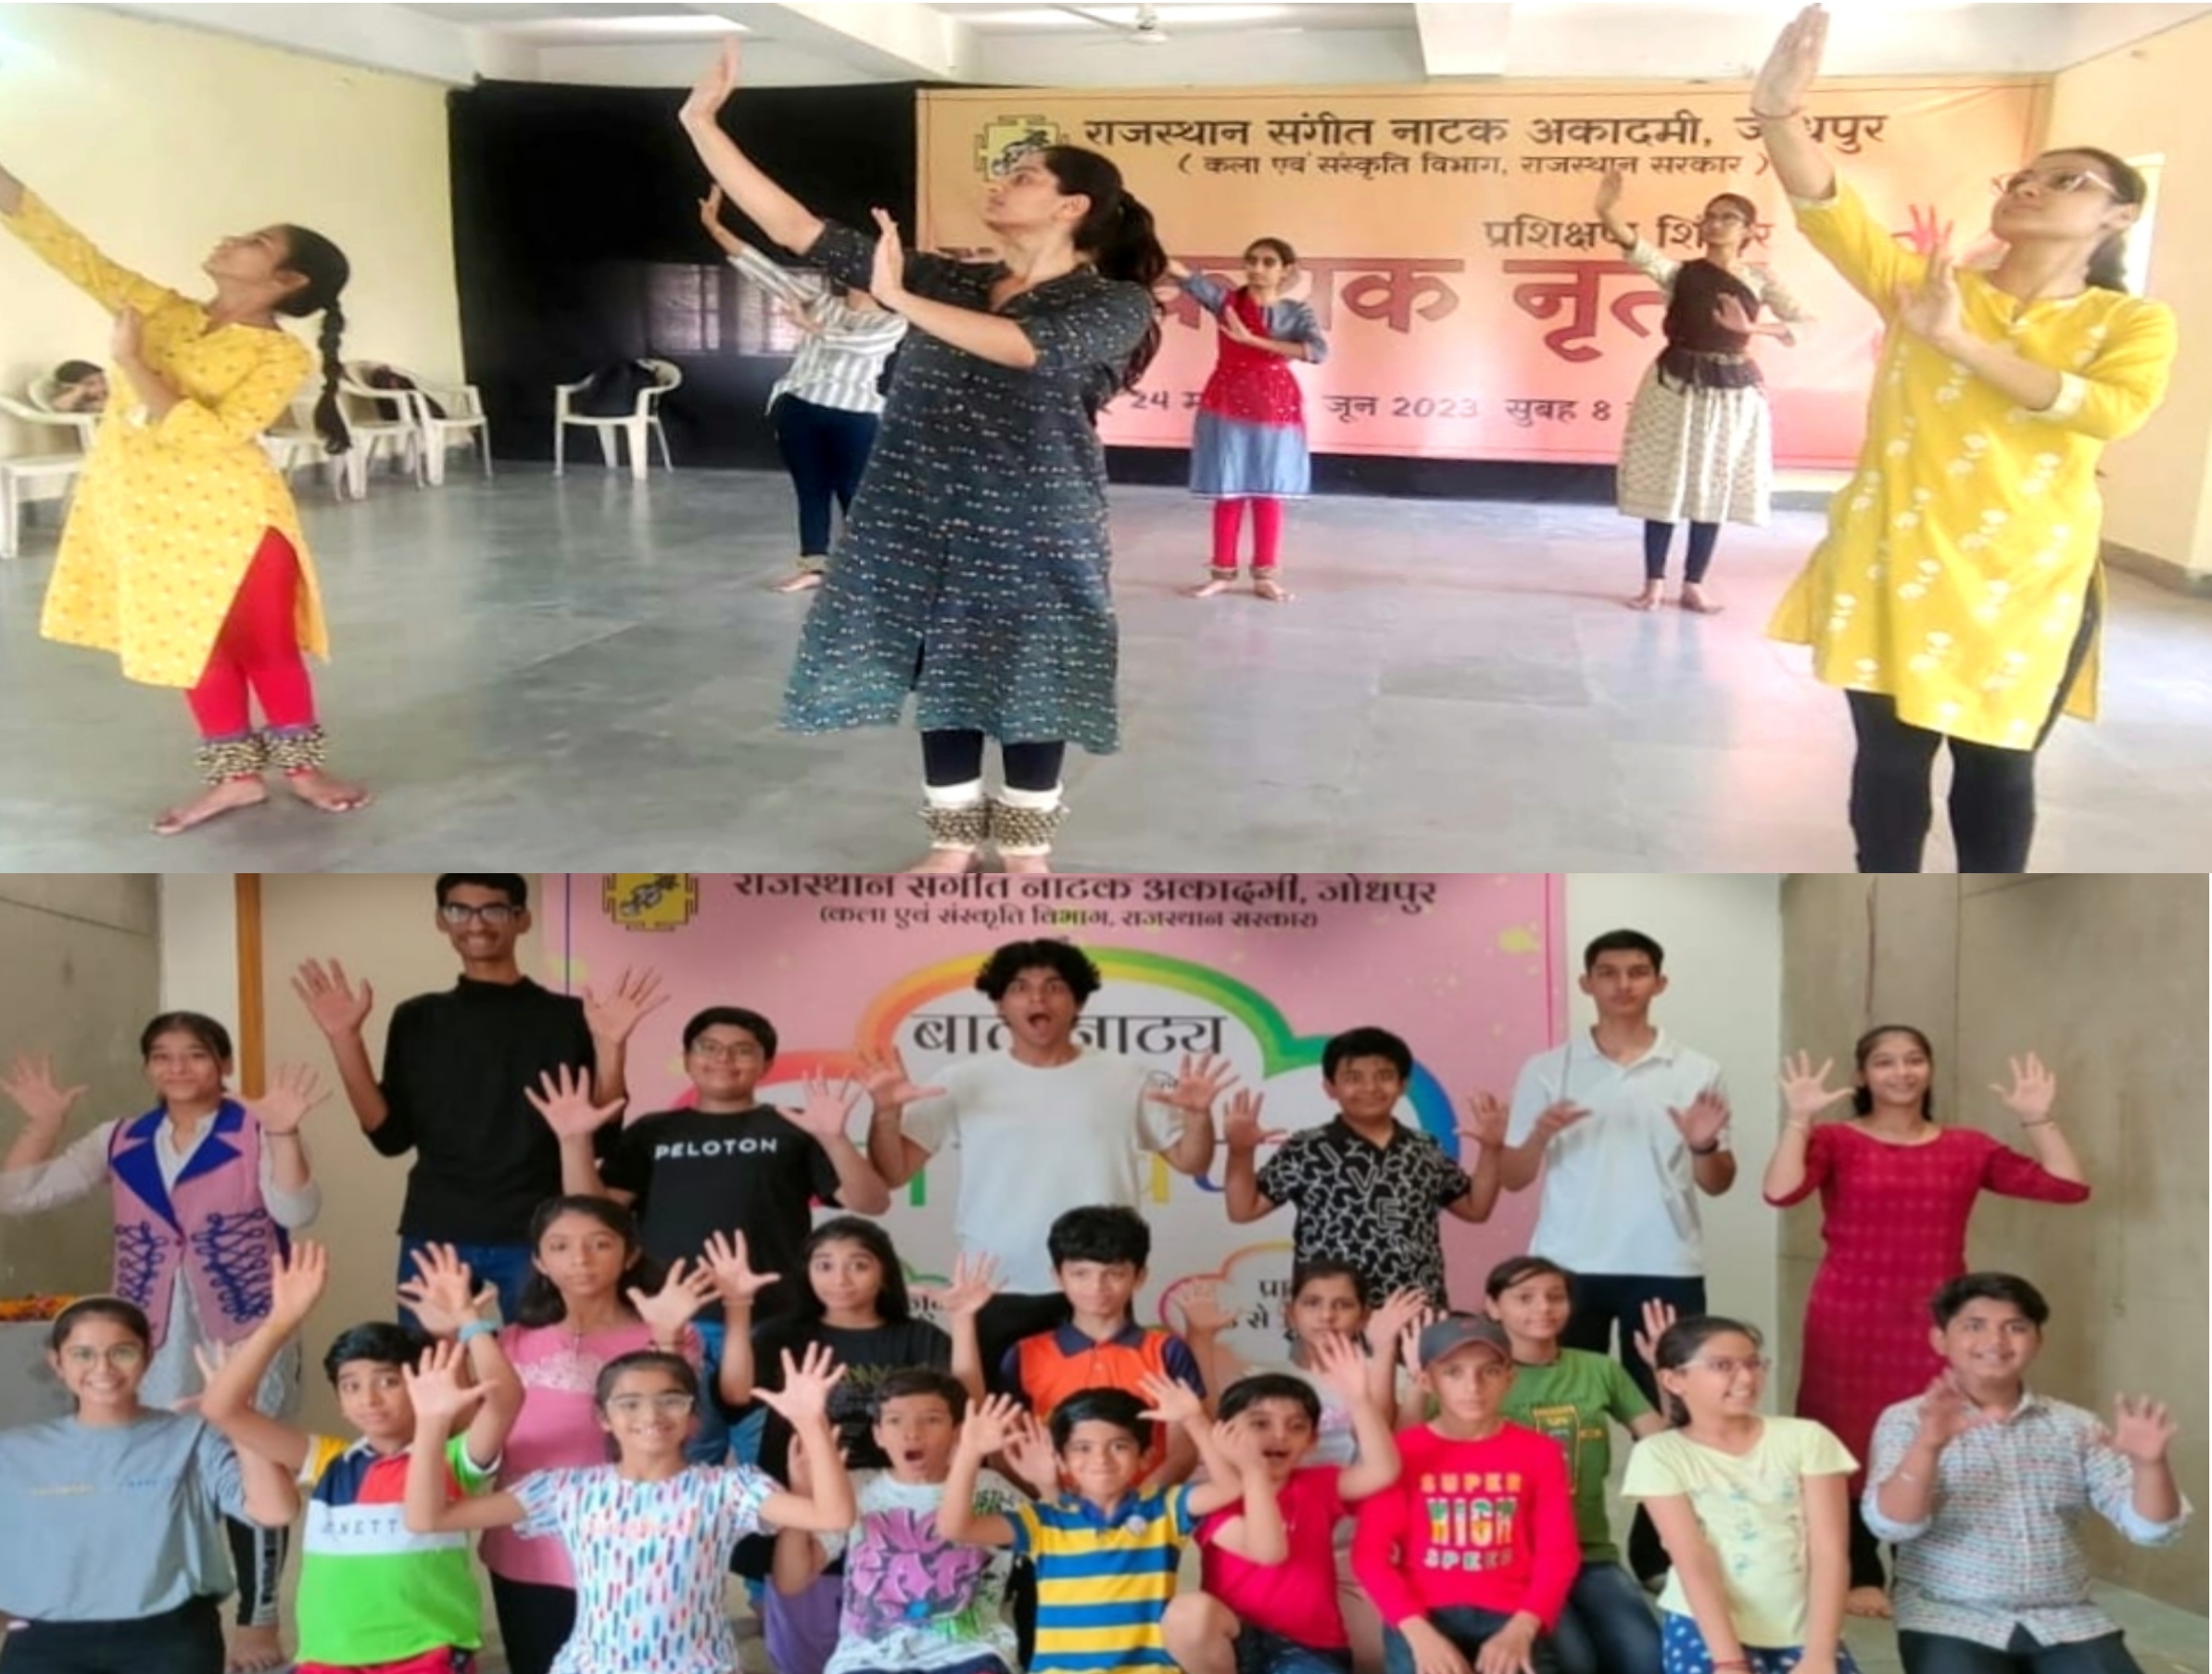 20-day-kathak-camp-ends-on-saturday